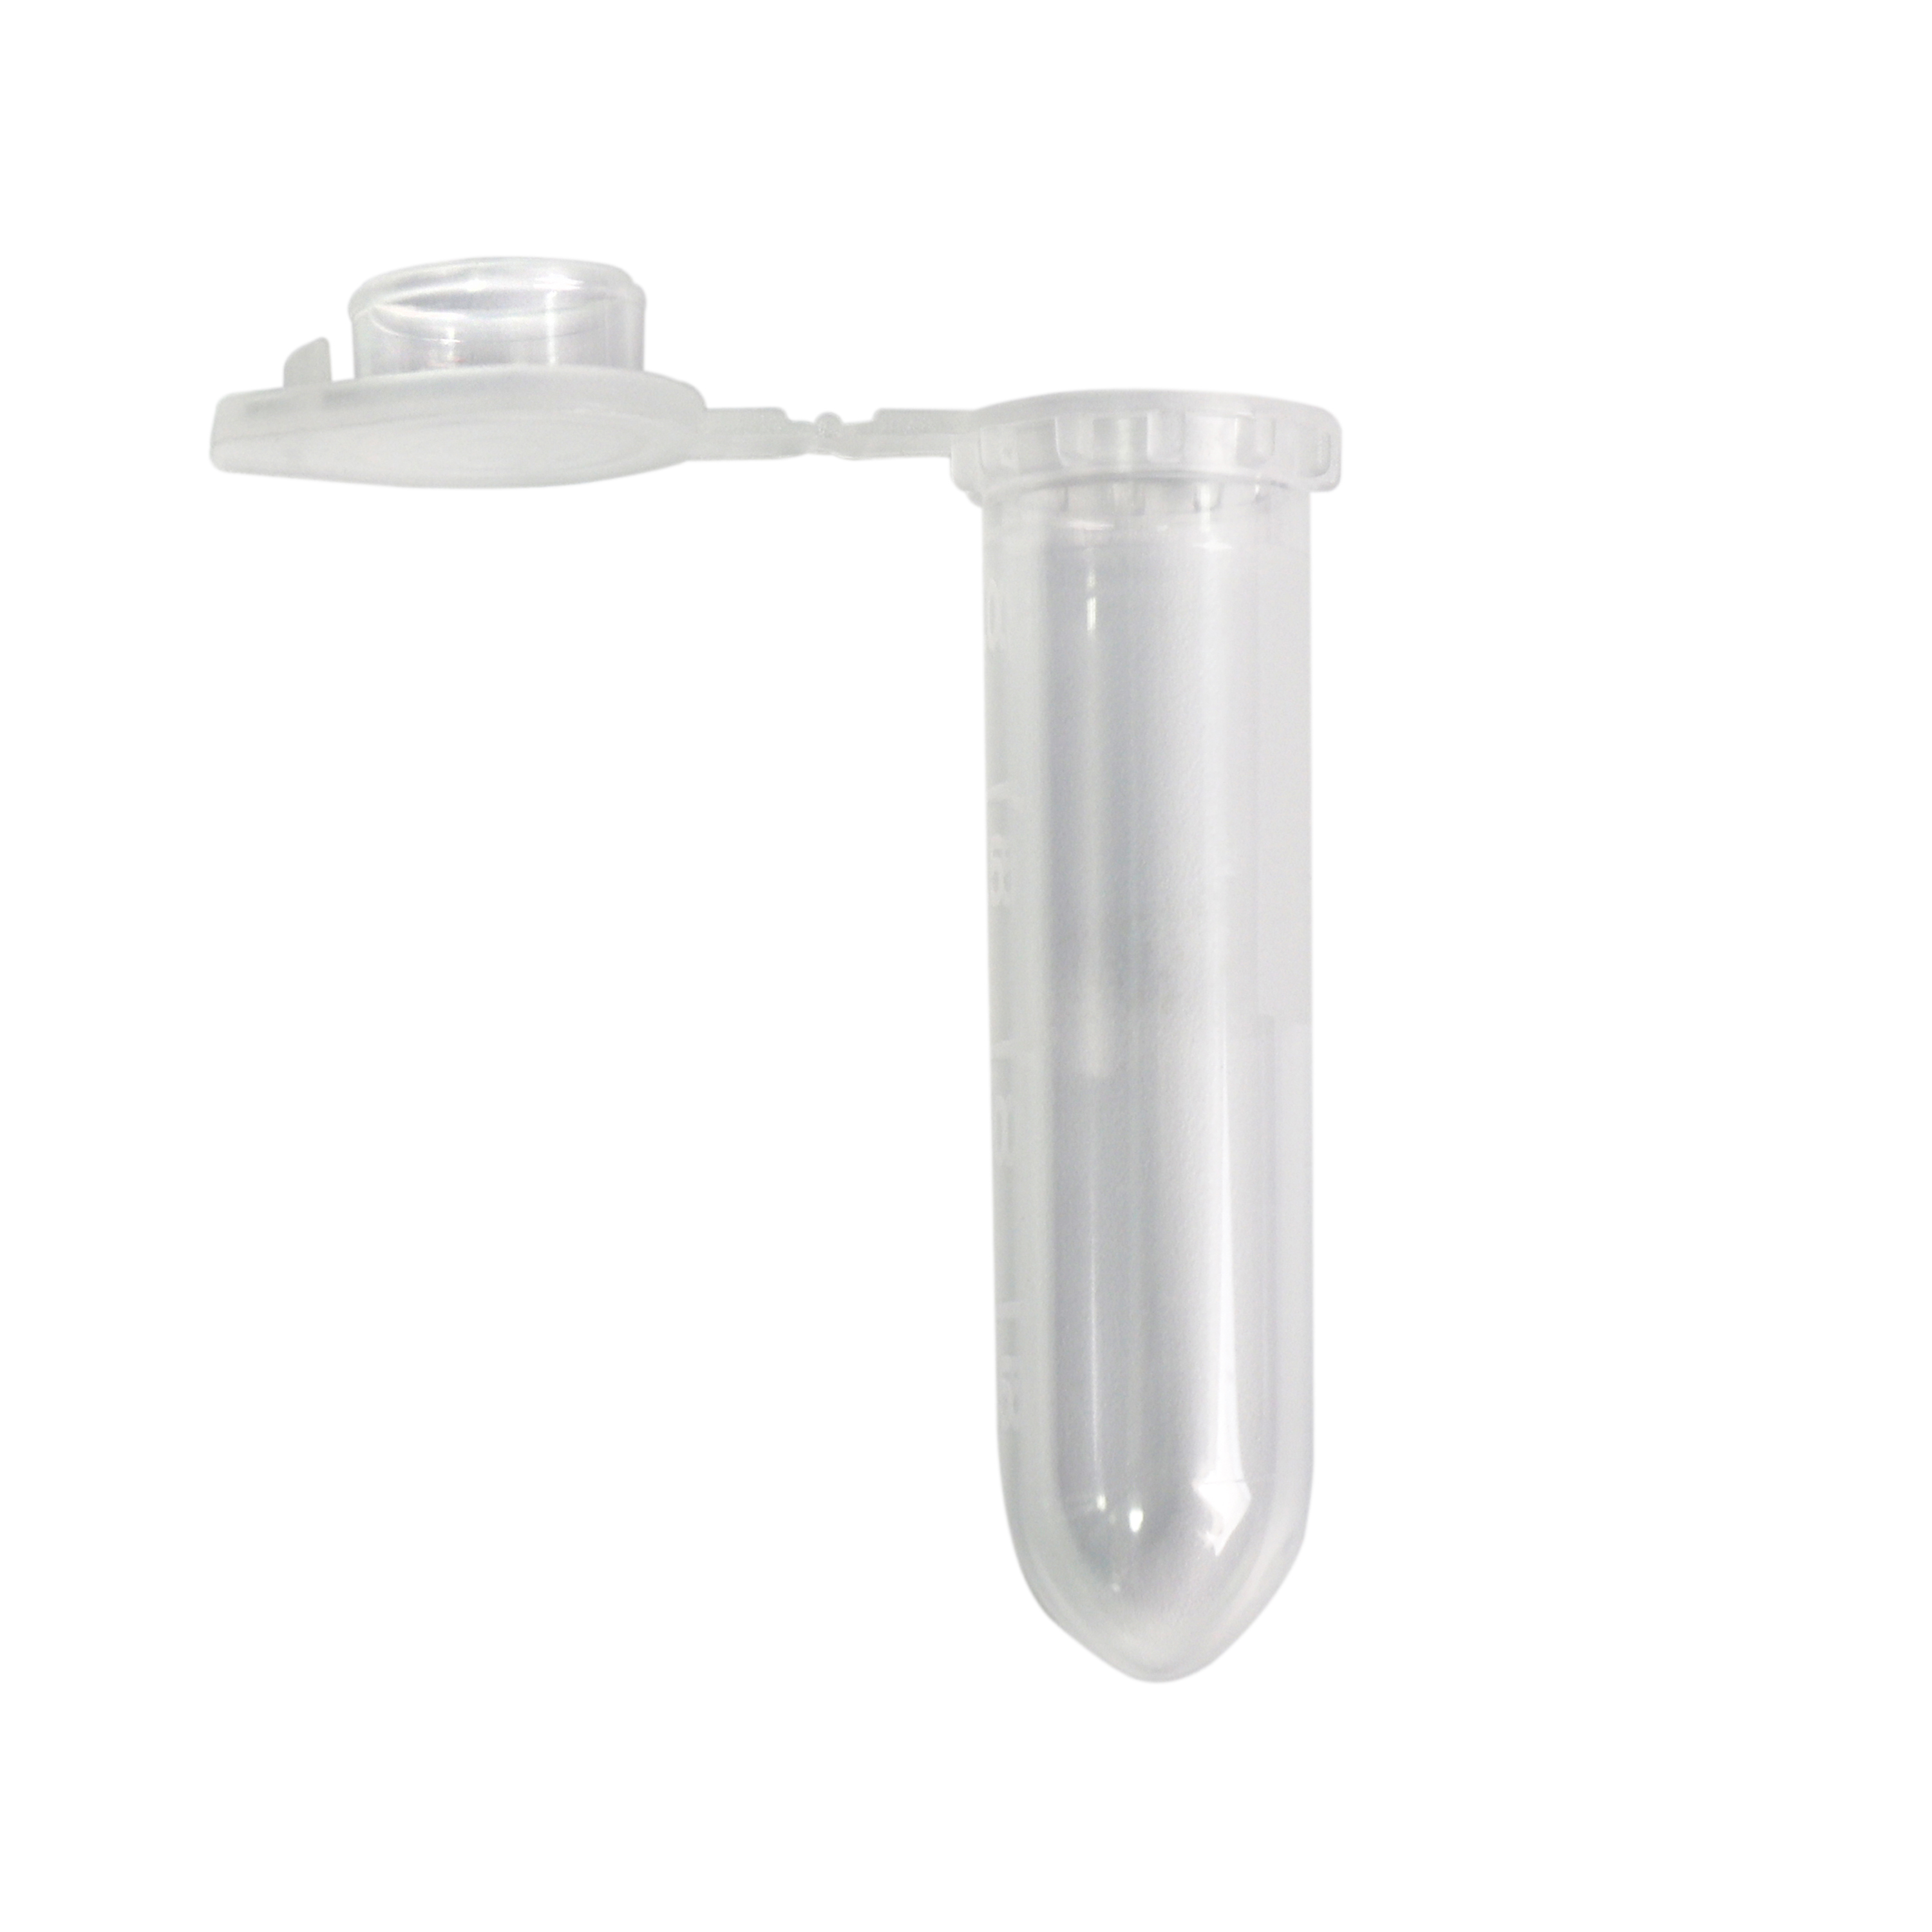 ULAB Scientific Autoclavable Microcentrifuge Tubes 2ml with Hinged Lid, Falcon Tube, Frosted Writing Area, Polypropylene Graduated, Pack of 500, UCT1004